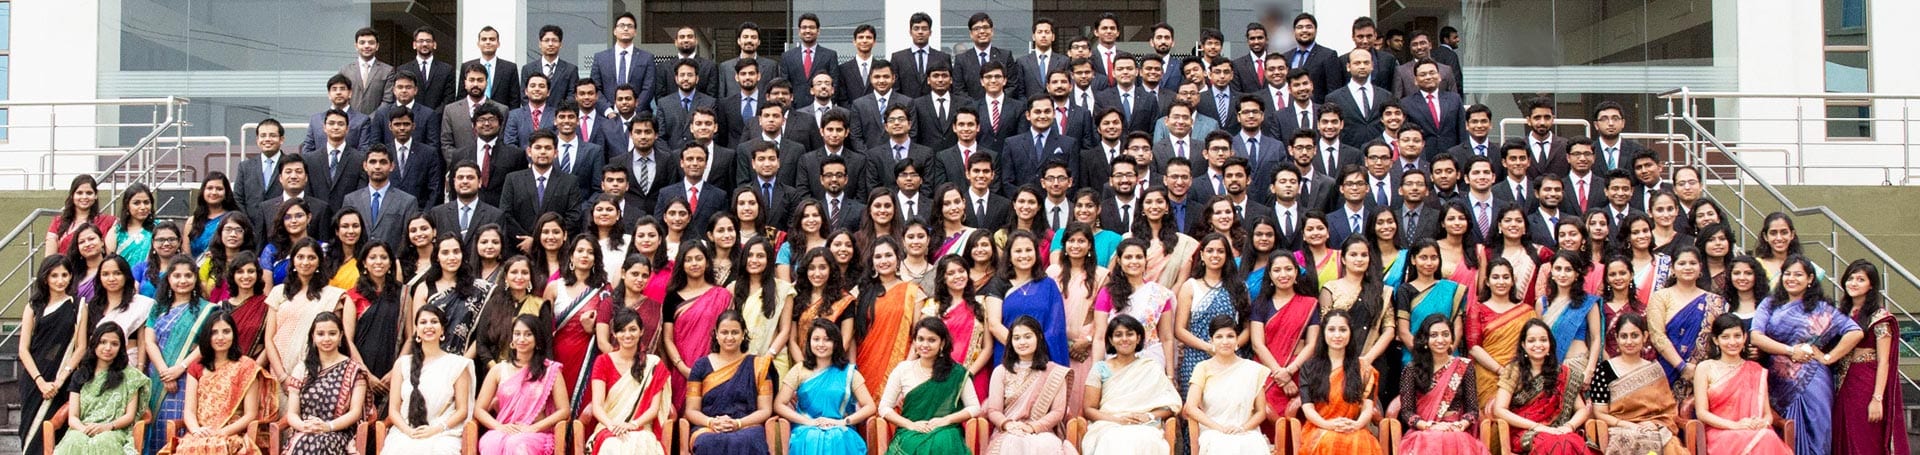 XLRI announces admissions to Executive Diploma in Human Resource Management for Working Executives (EDHRM: 2018-19)